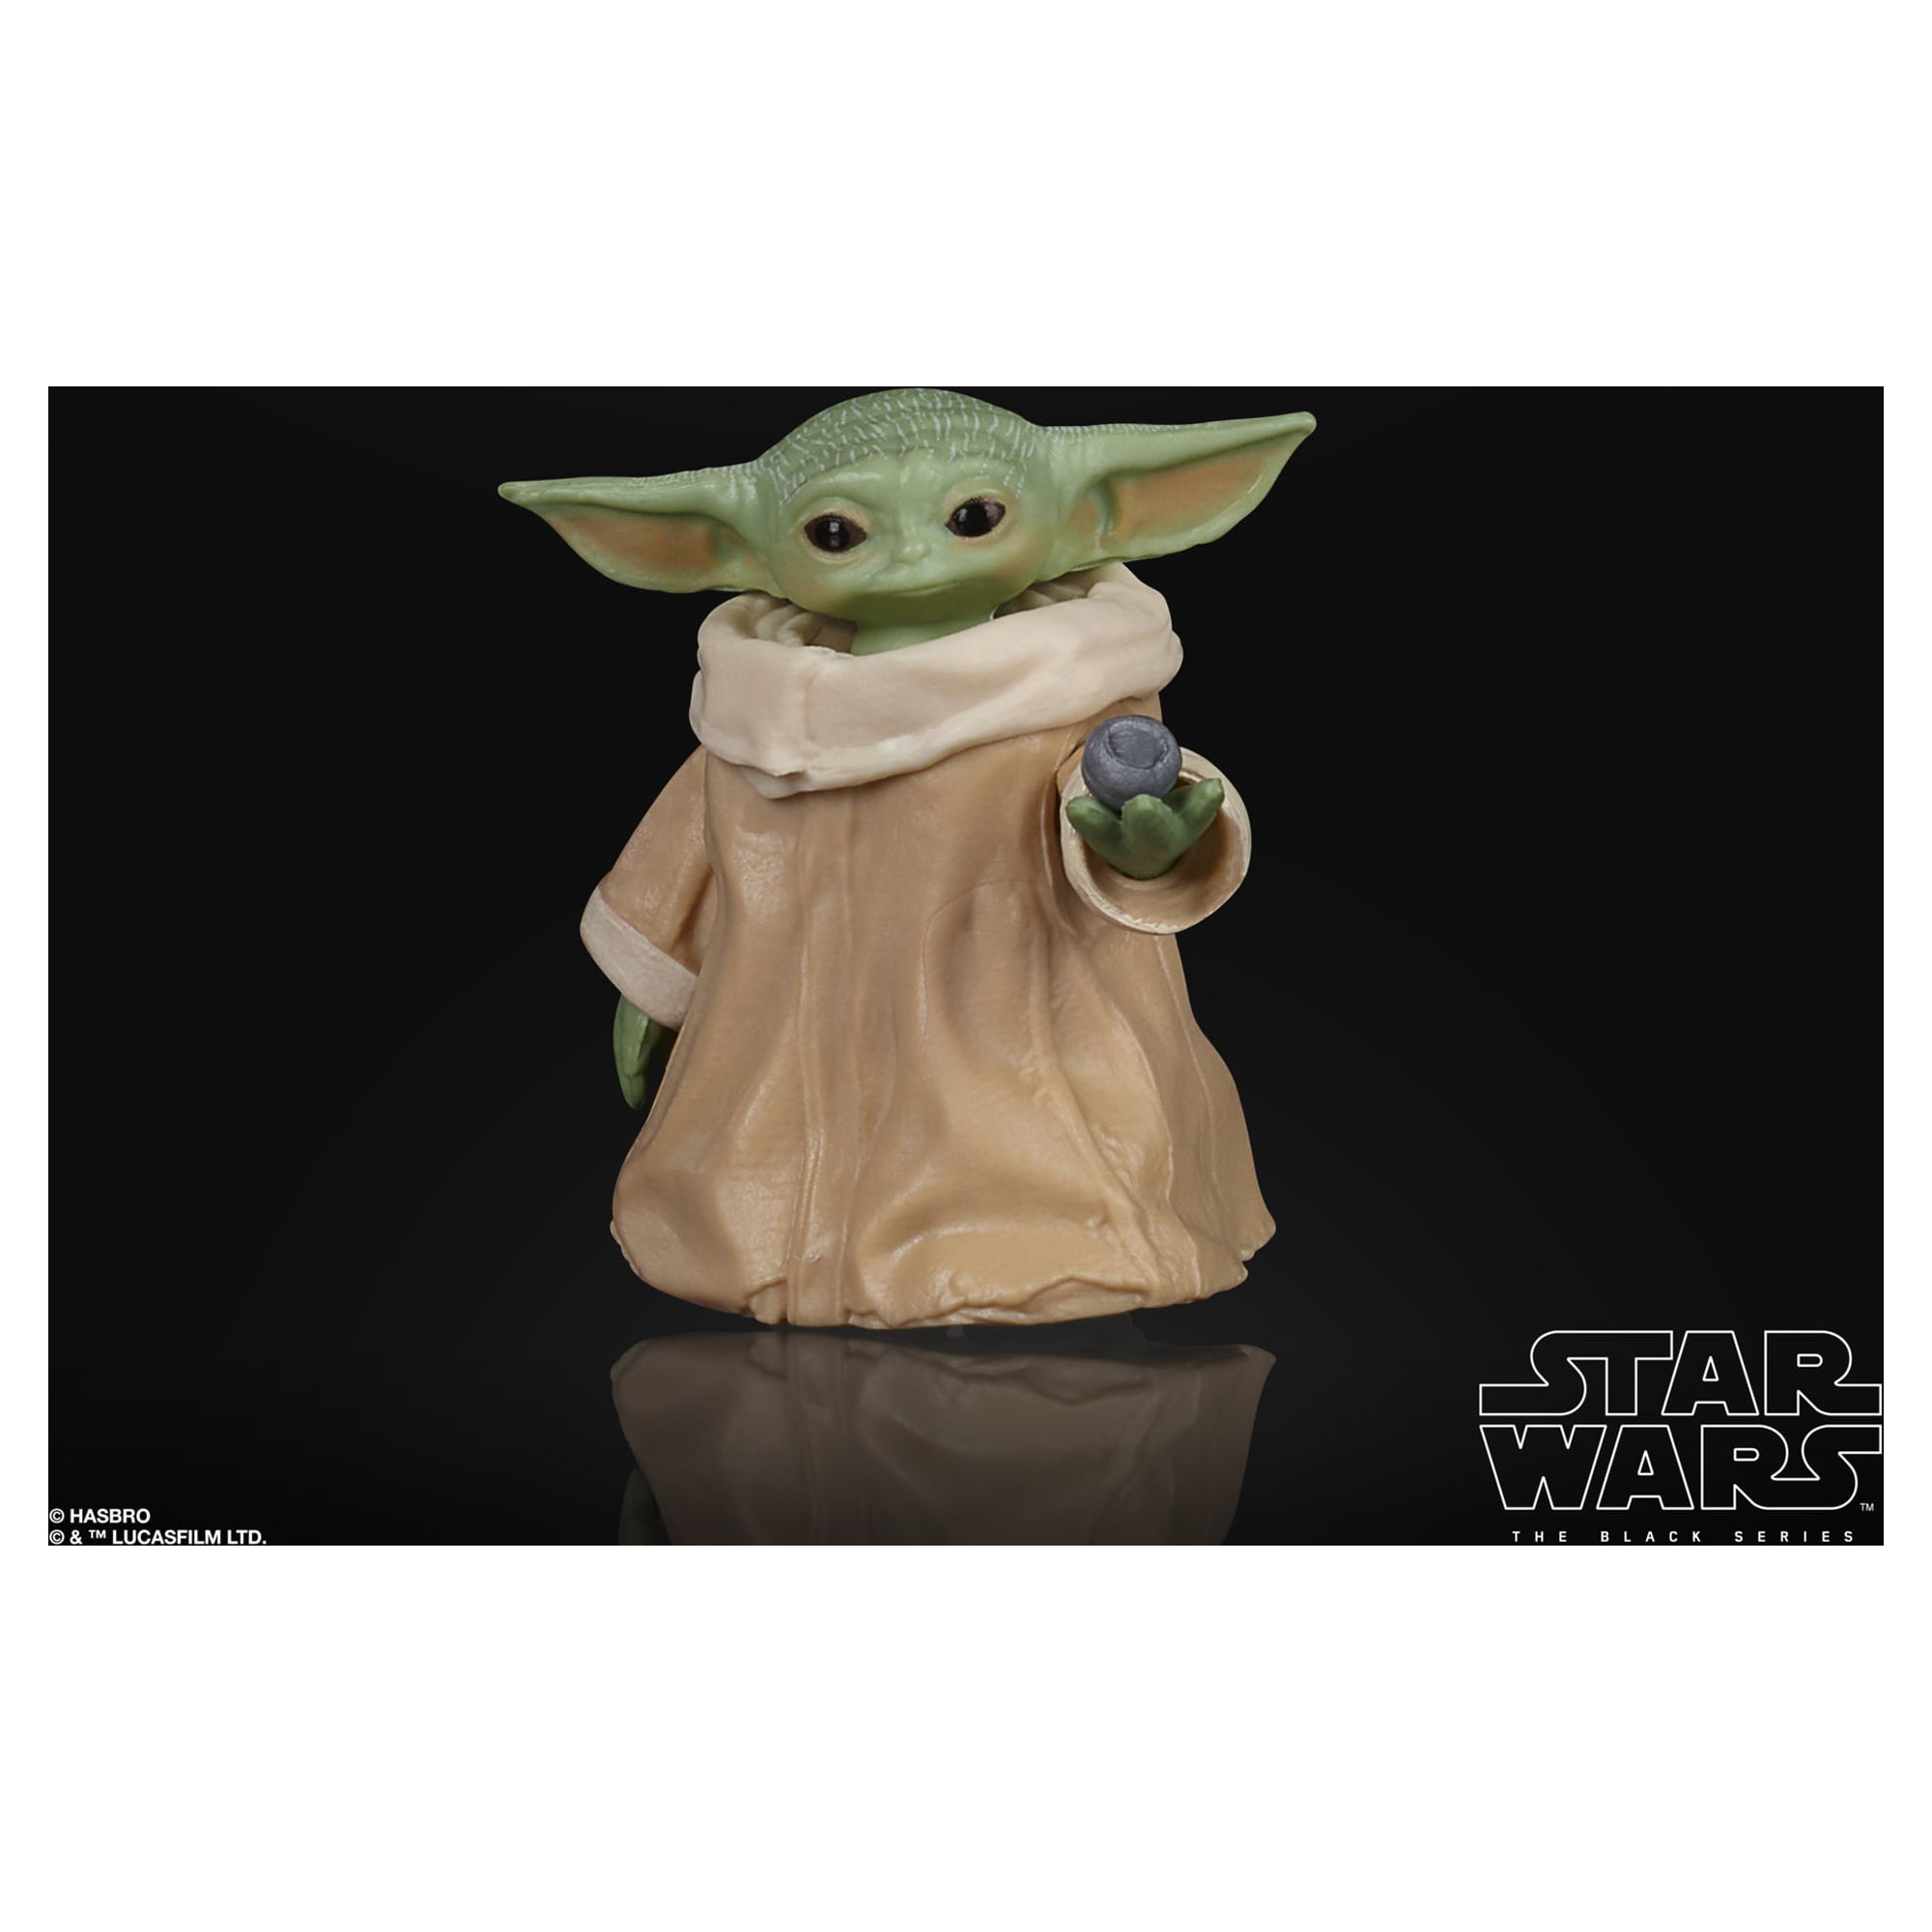 Star Wars The Black Series The Child Toy Action Figure (1.1 inches) - image 5 of 6